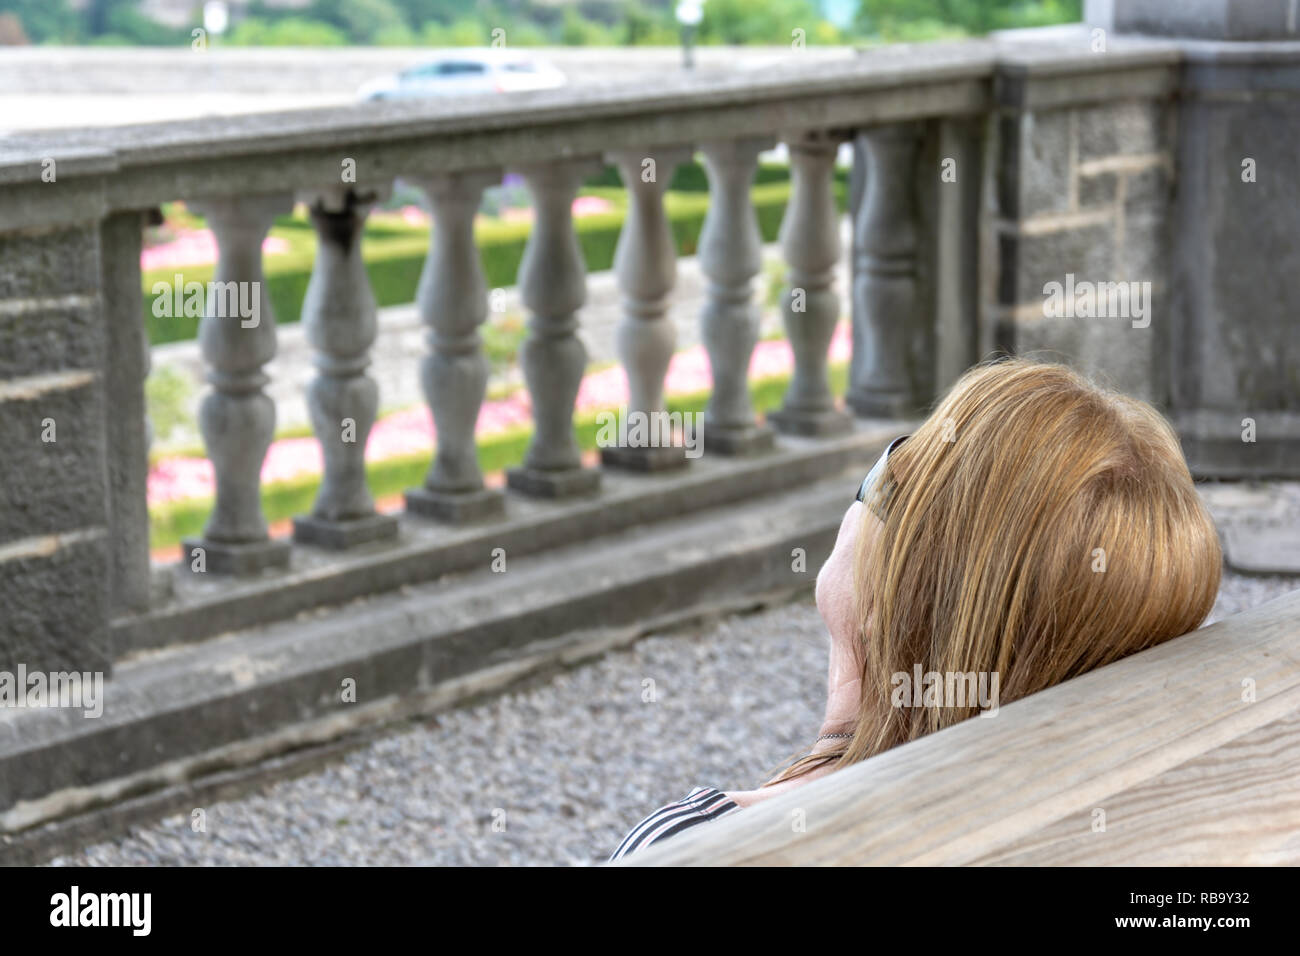 A vision of a blond woman's head with sun glasses in front of a concrete decorative low wall Stock Photo